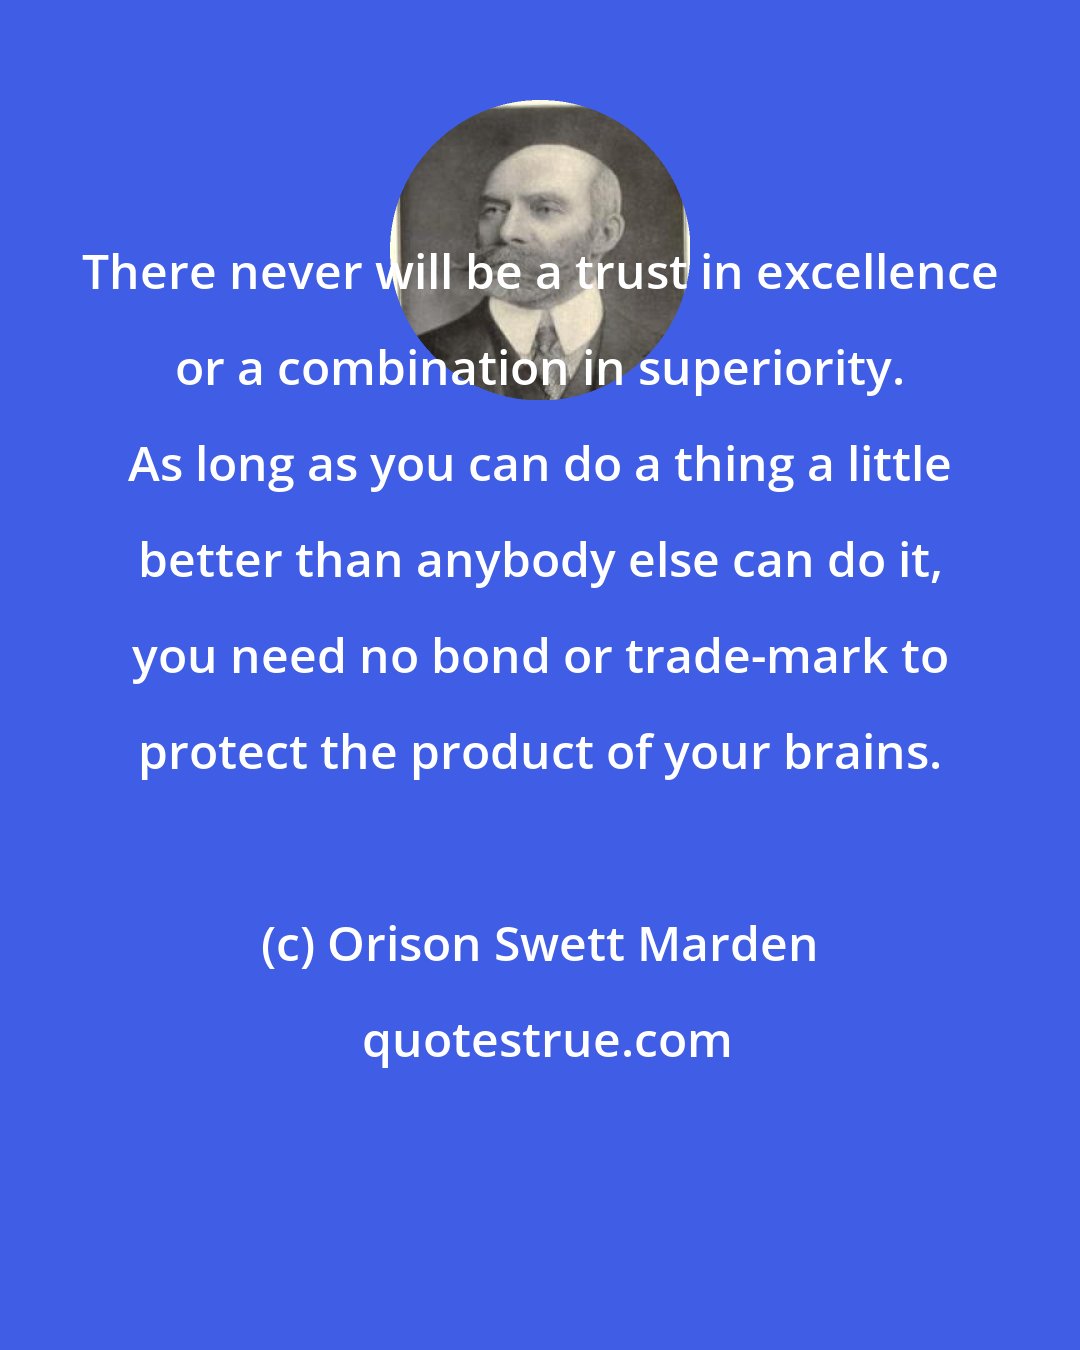 Orison Swett Marden: There never will be a trust in excellence or a combination in superiority. As long as you can do a thing a little better than anybody else can do it, you need no bond or trade-mark to protect the product of your brains.